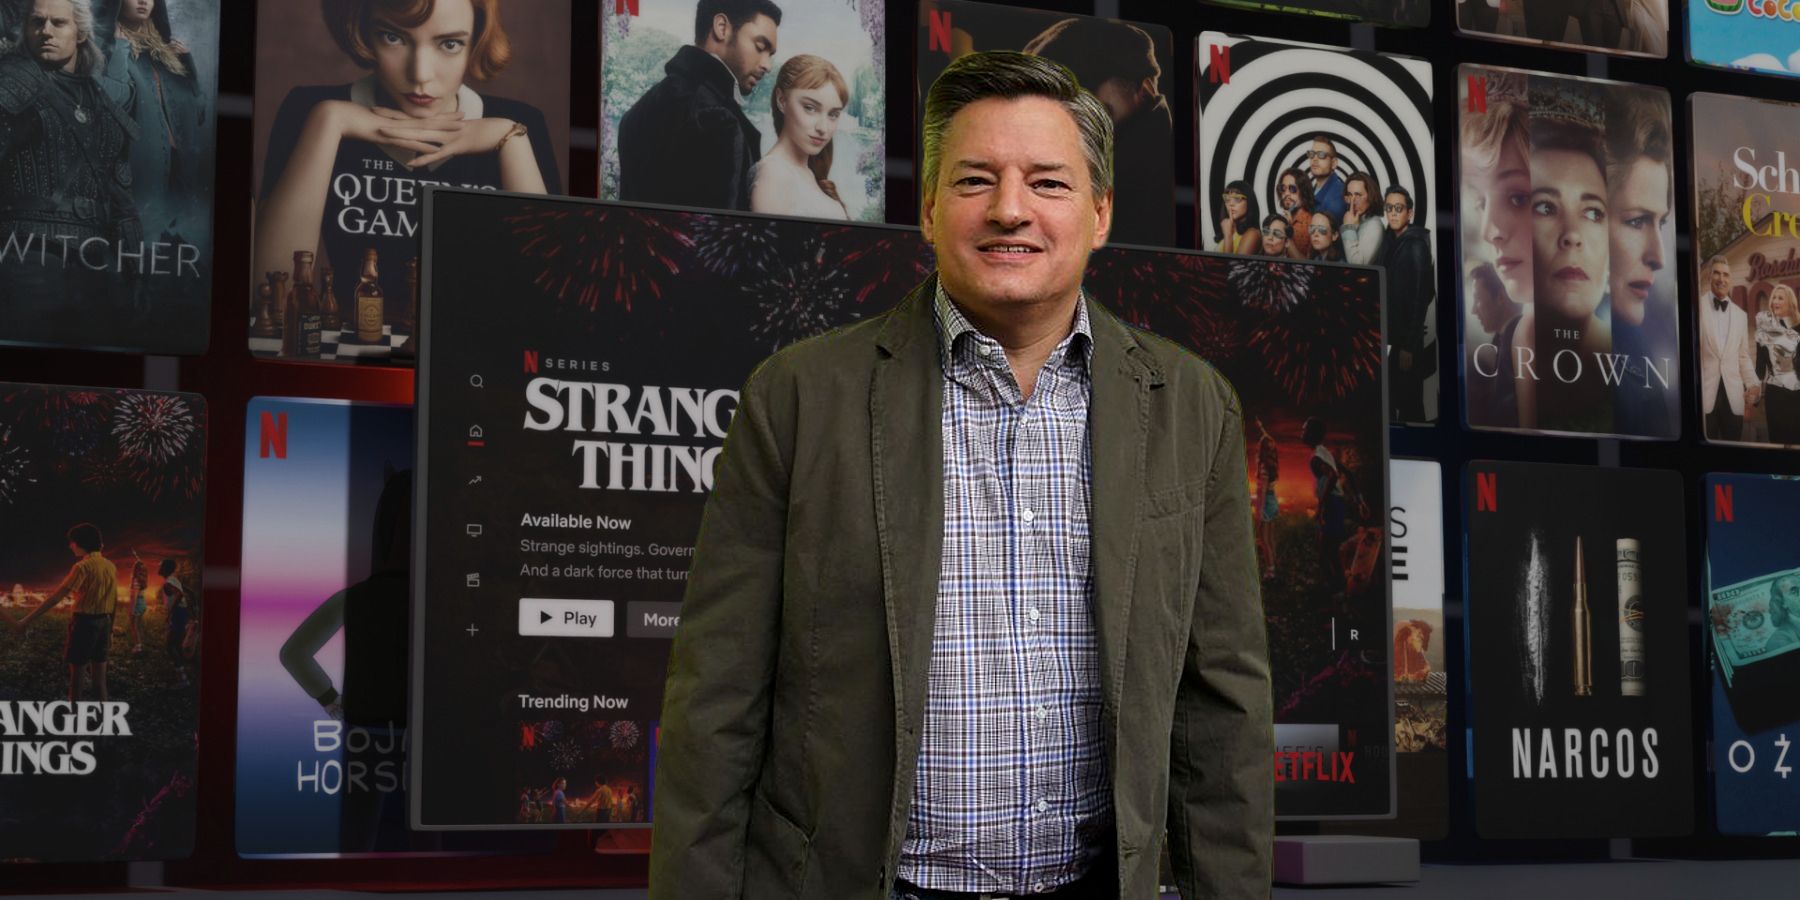 Netflix CEO Ted Sarandos with content programming background